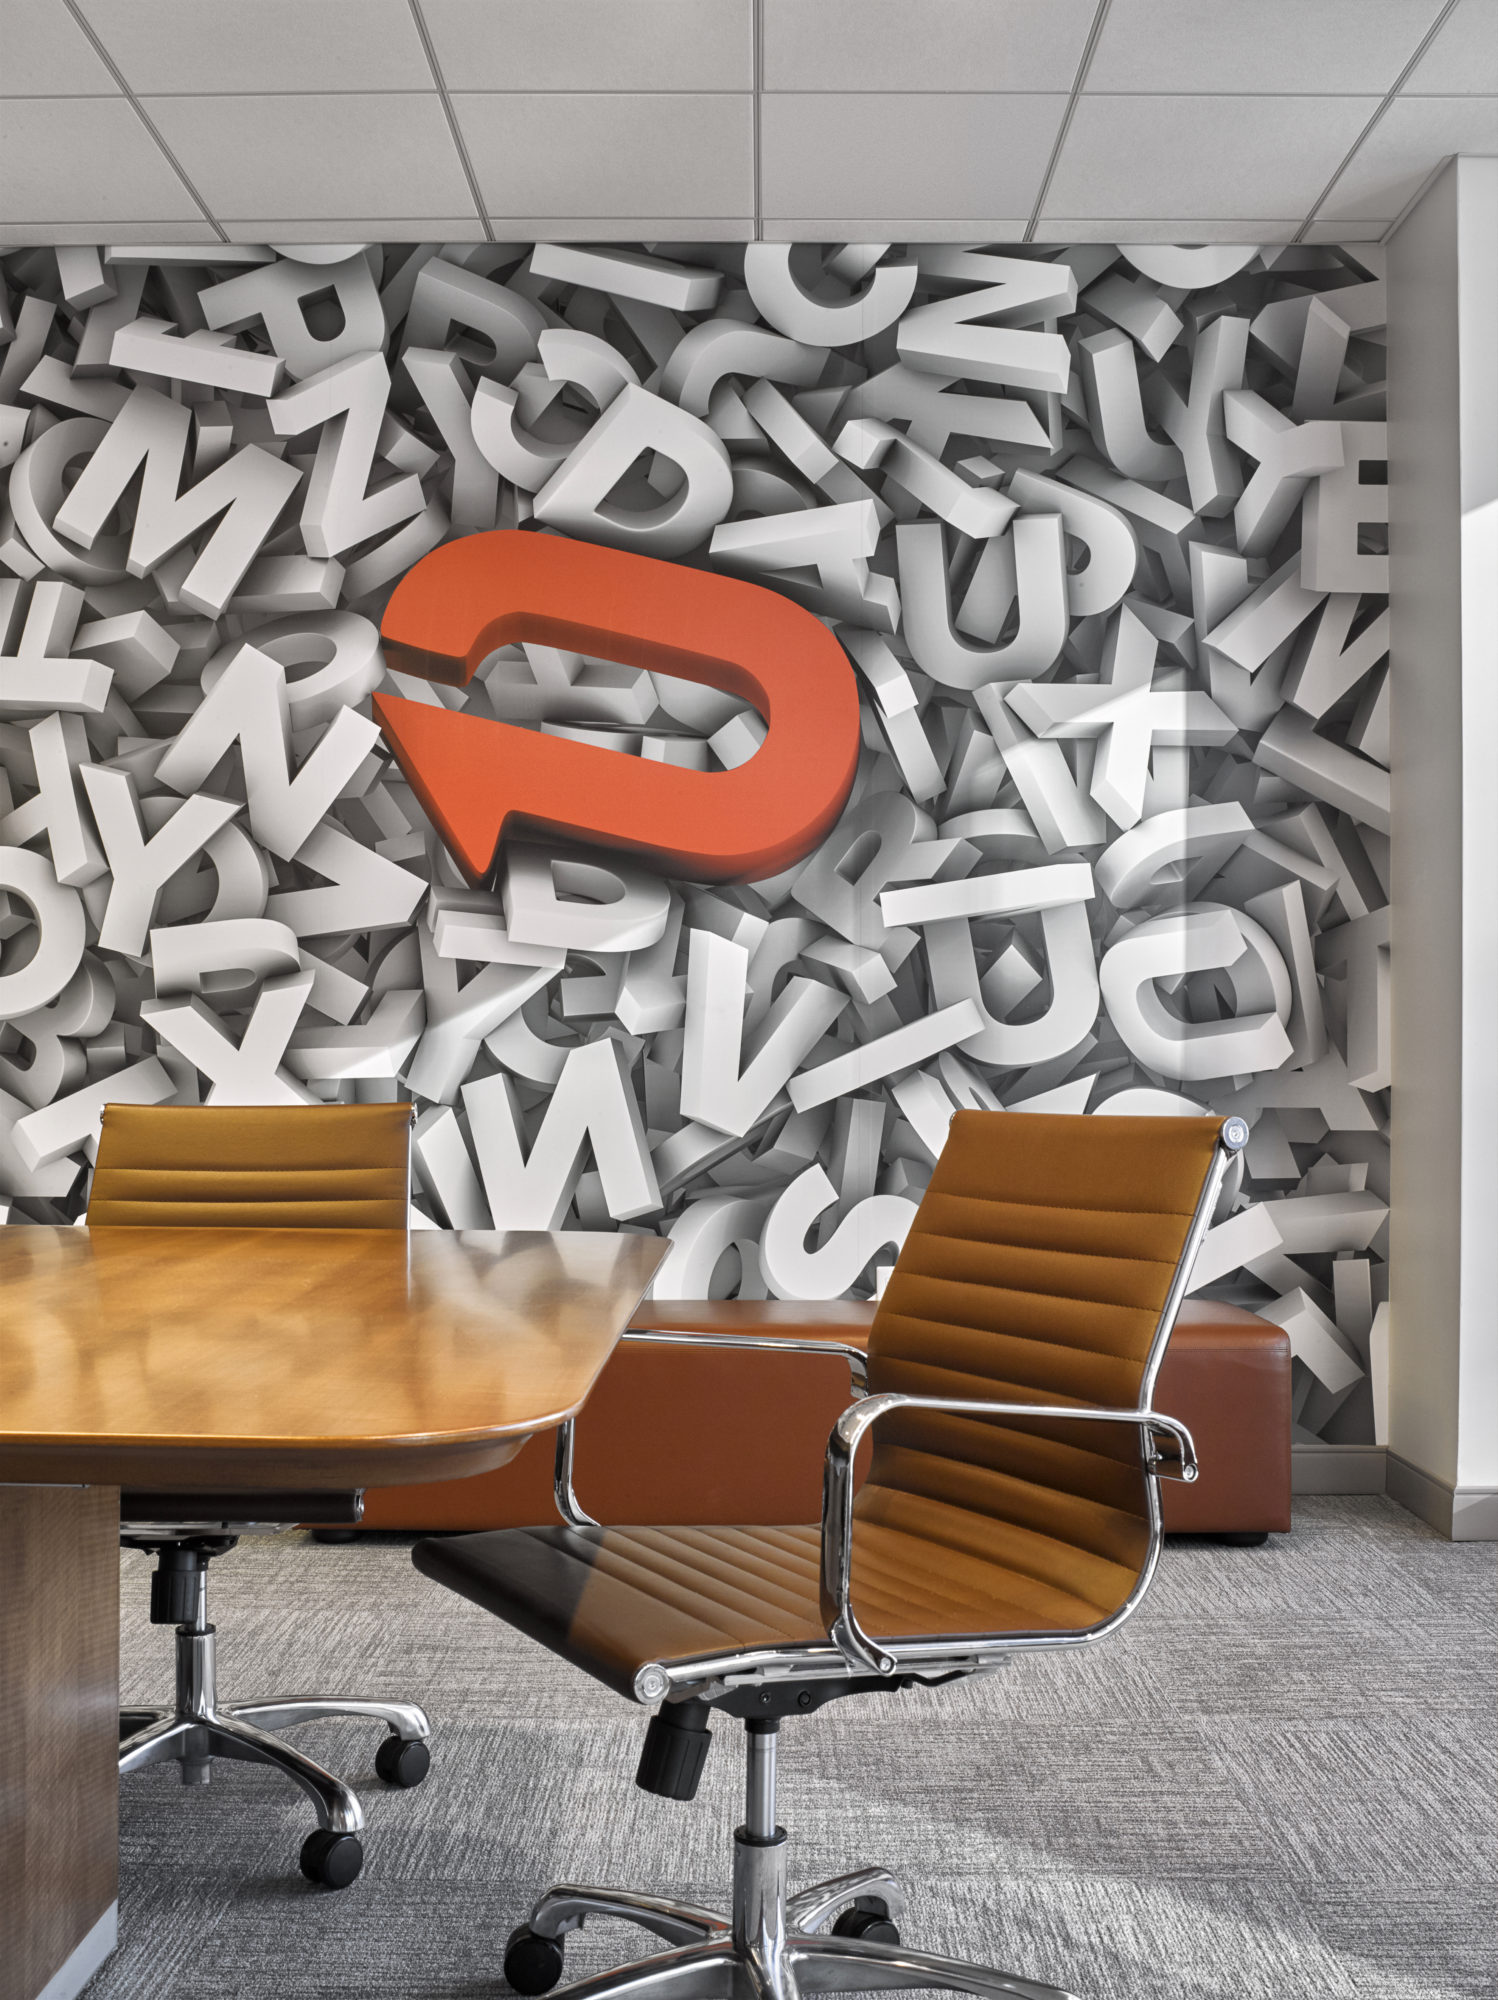 3D wallpaper with the Padilla CRT logo in a conference room at Padilla CRT, New York. MEP provided by 2L Engineering.